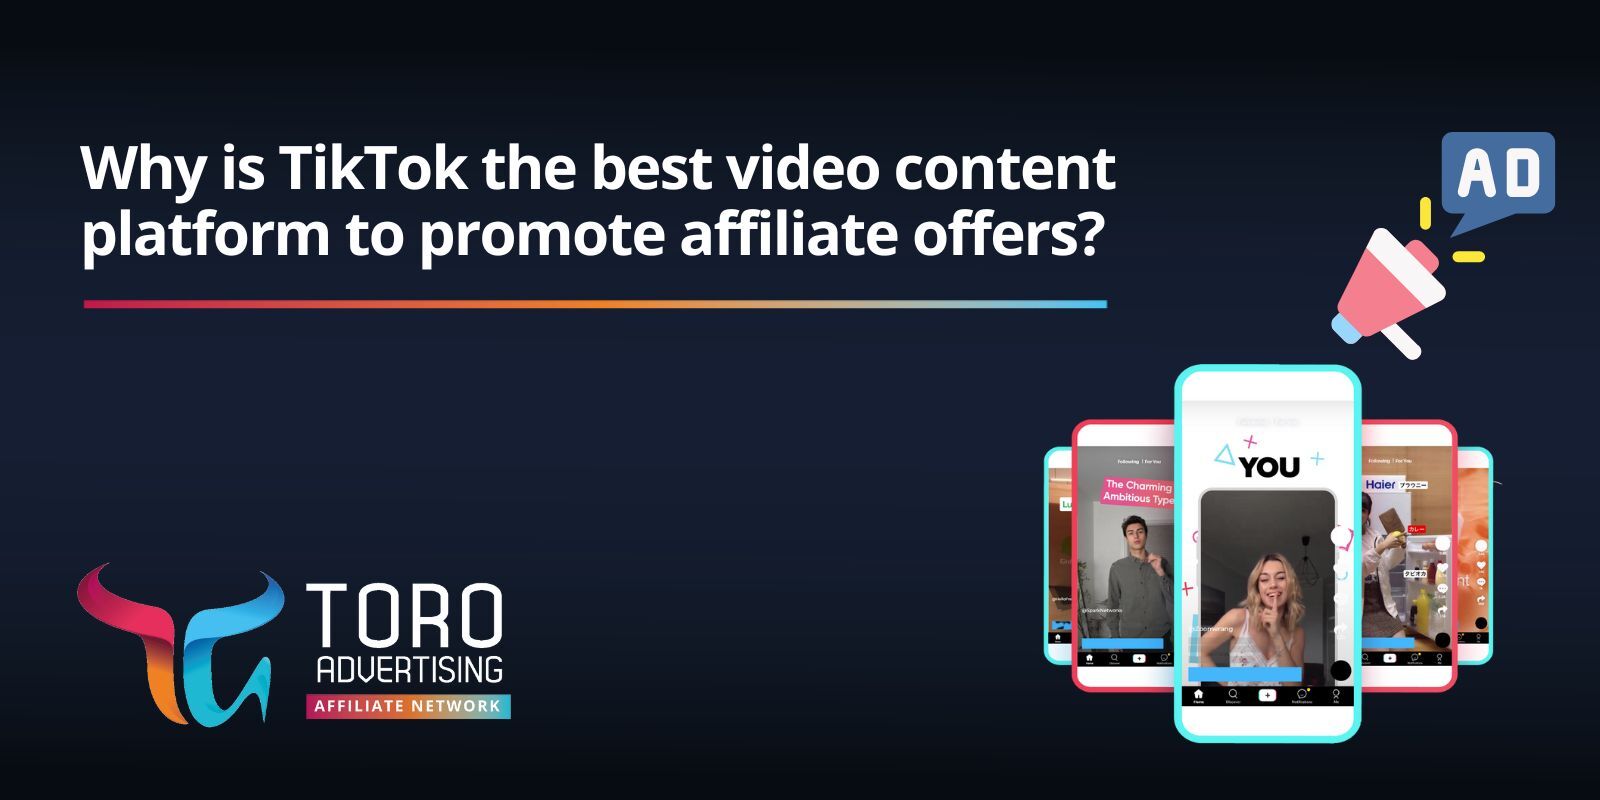 Why is TikTok the best video content platform to promote affiliate offers